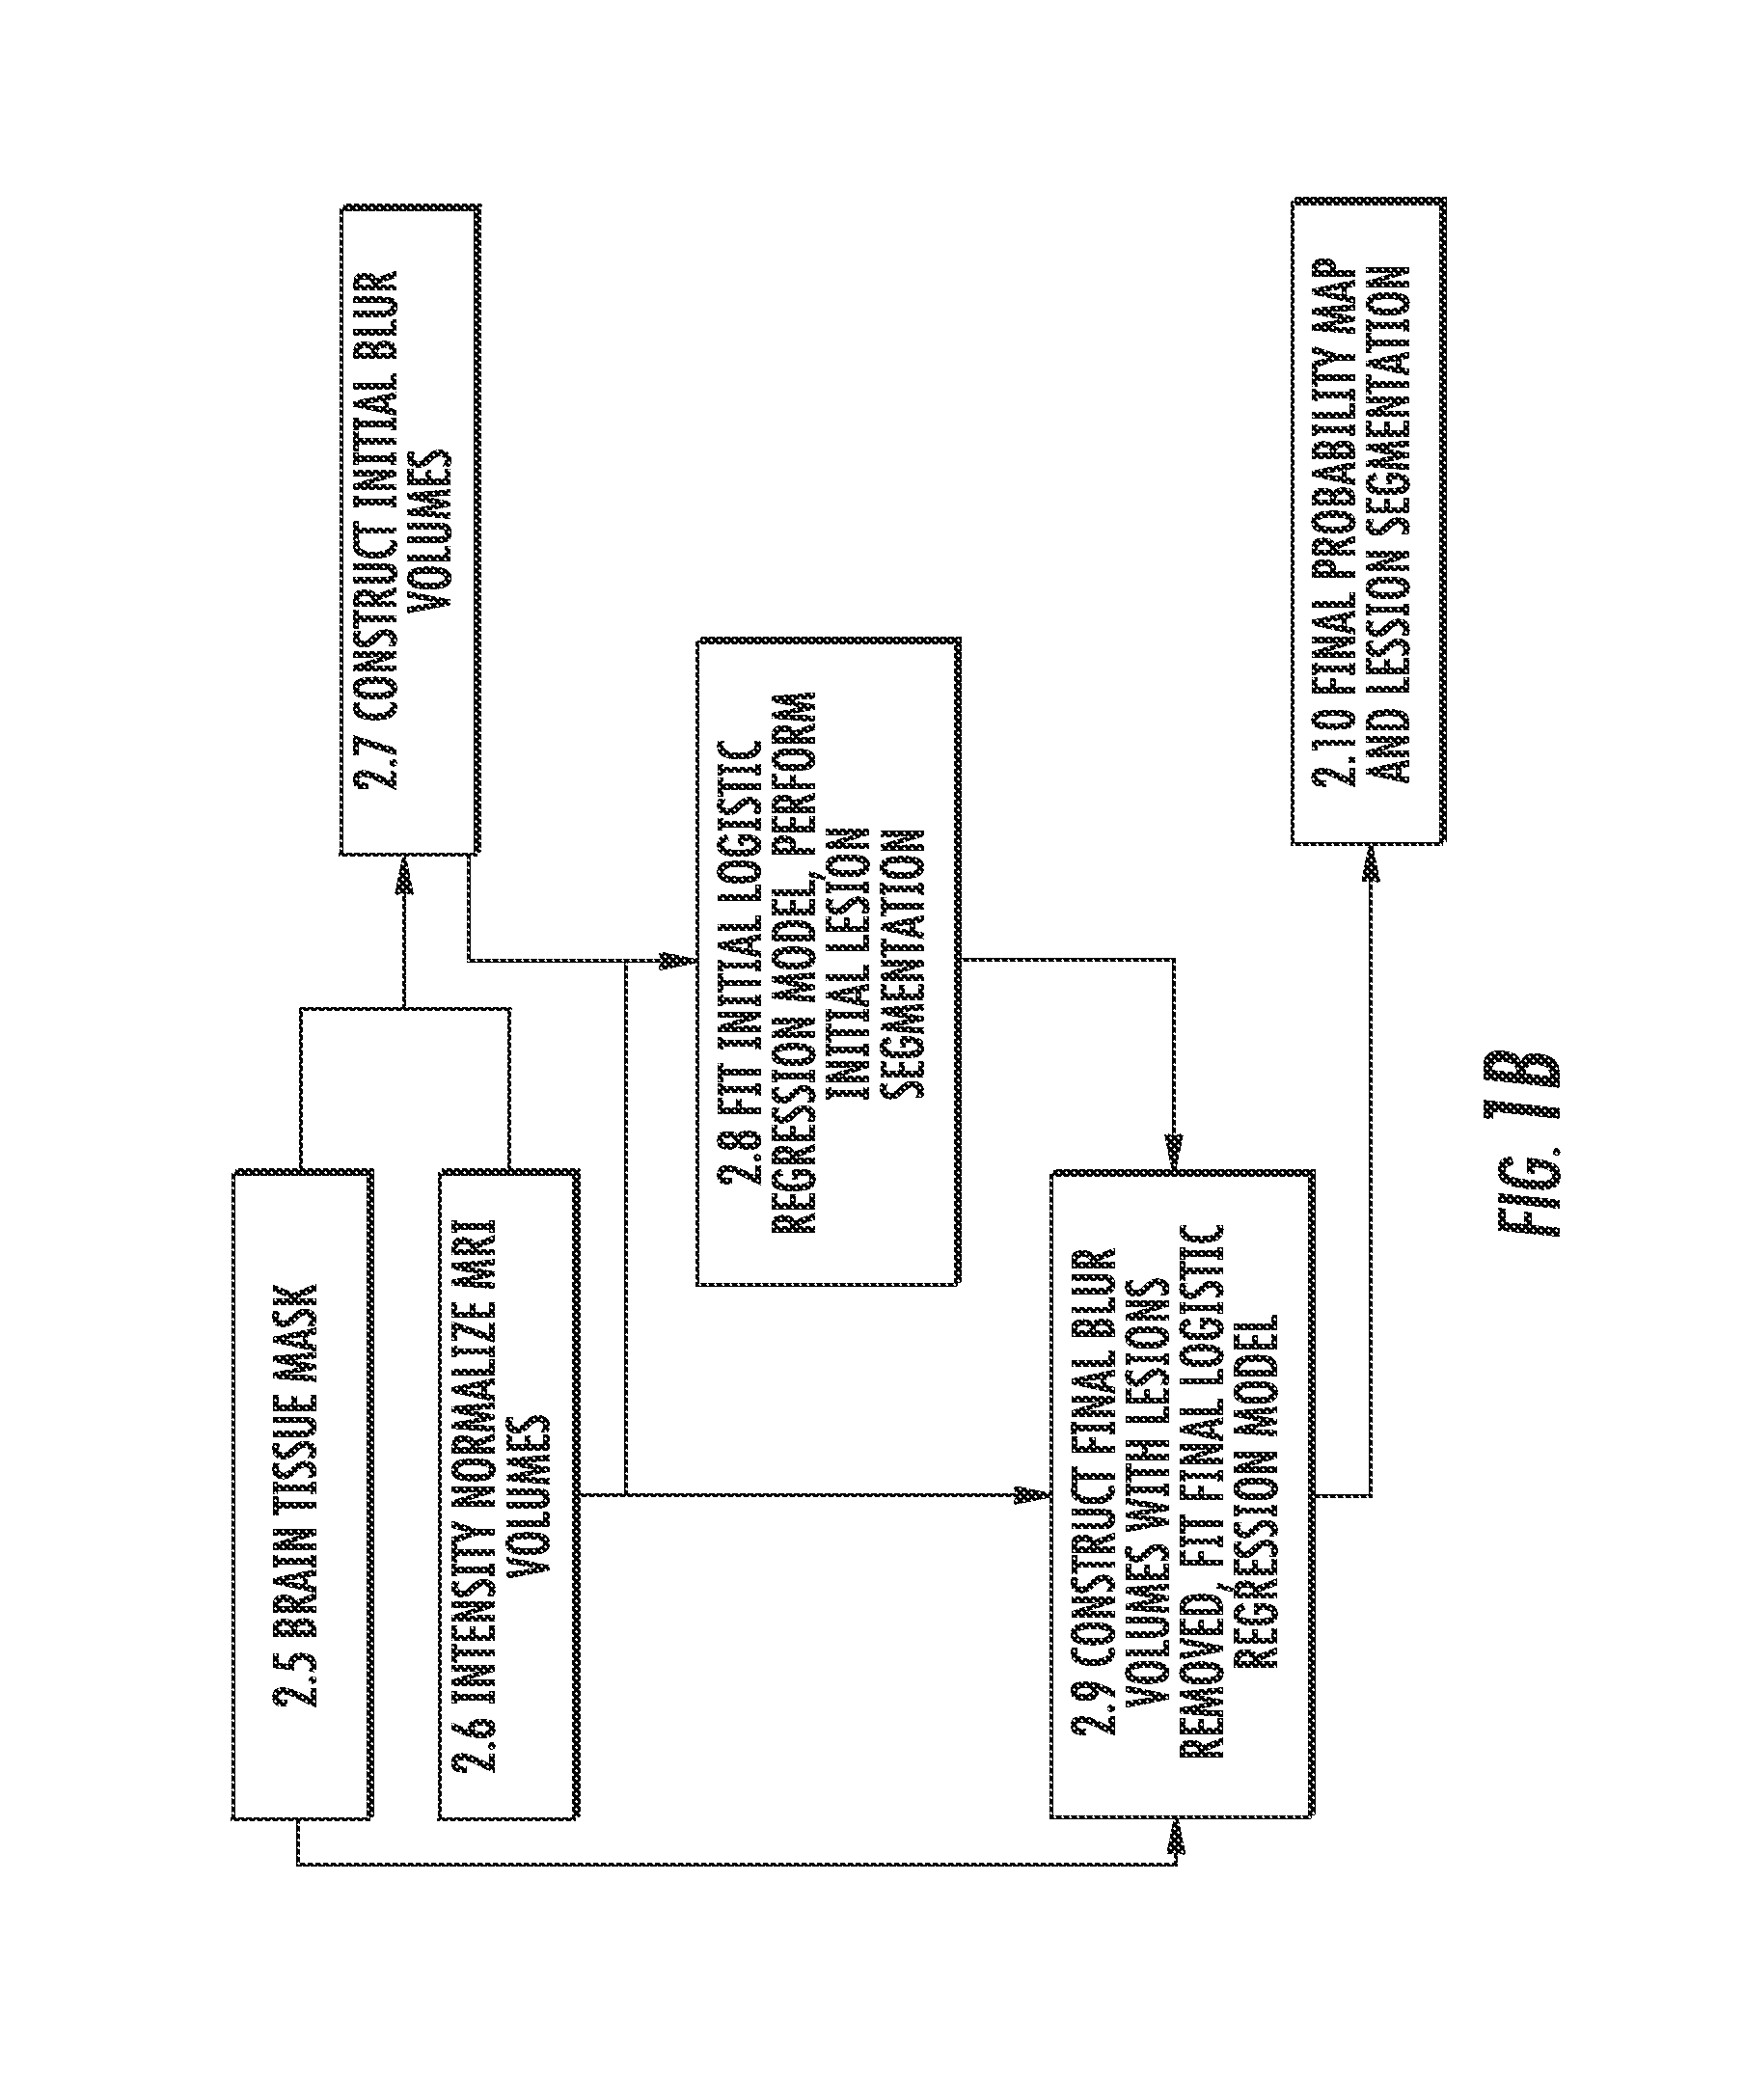 Method of analyzing multi-sequence MRI data for analysing brain abnormalities in a subject